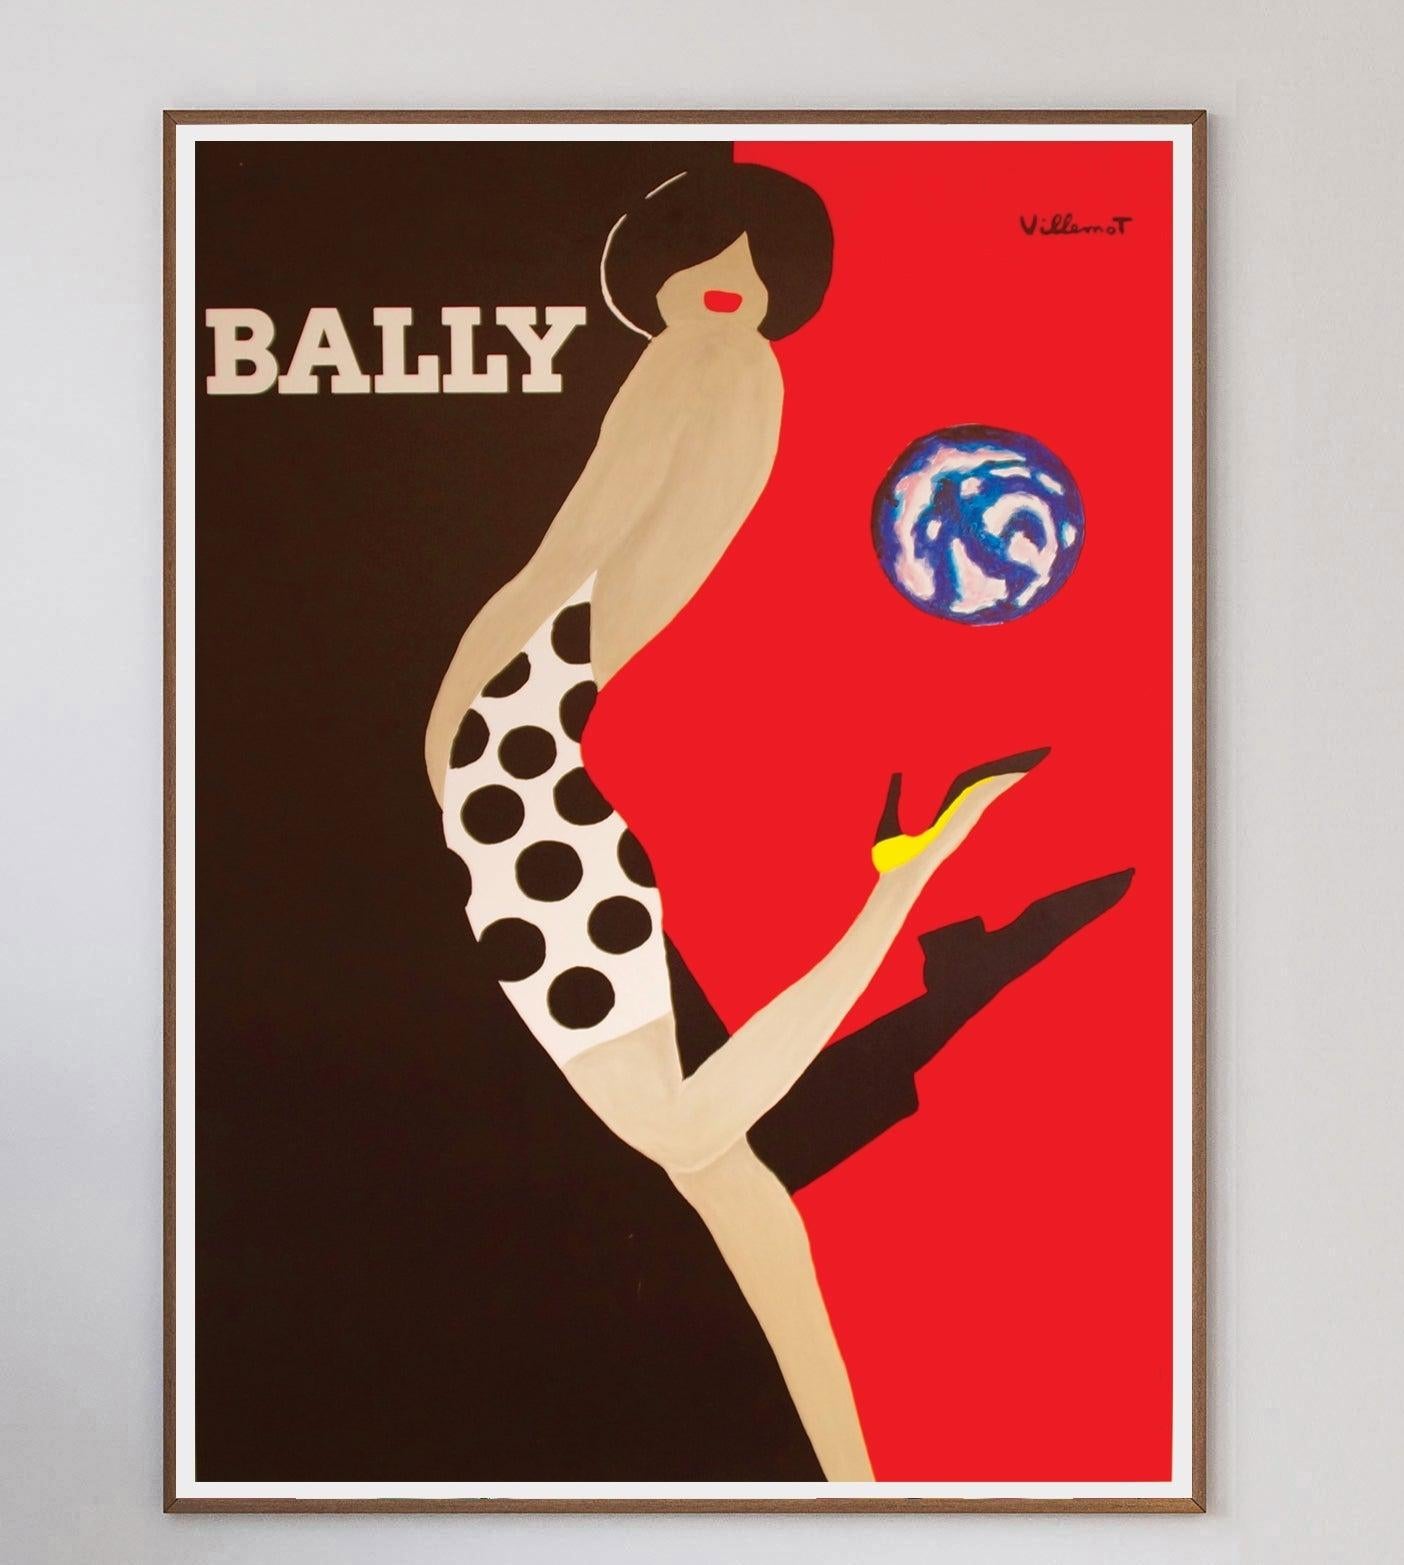 One of the most iconic and sought after designs of the 20th Century, the collaborations between Bernard Villemot and Bally showcase the crossover between advertisement and fine art.

The luxury Swiss shoemaker worked with the celebrated poster